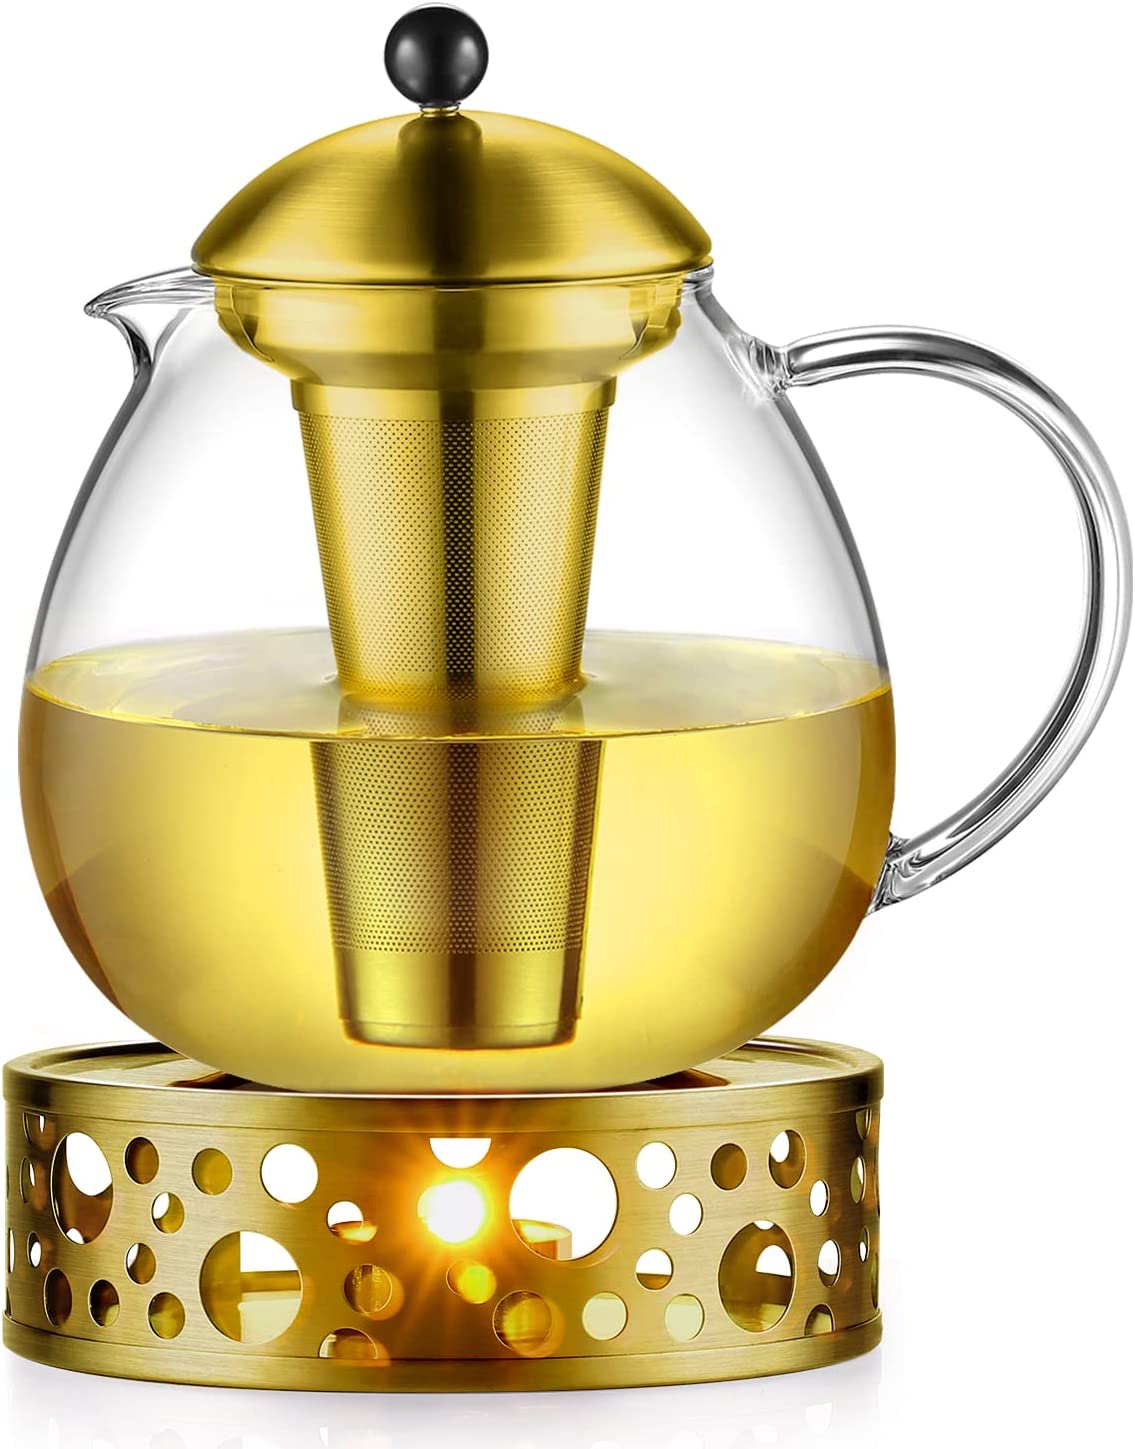 glastal 1500 ml Golden Teapot with Teapot Warmer Glass and Stainless Steel Tea Cosy Teapot Suit